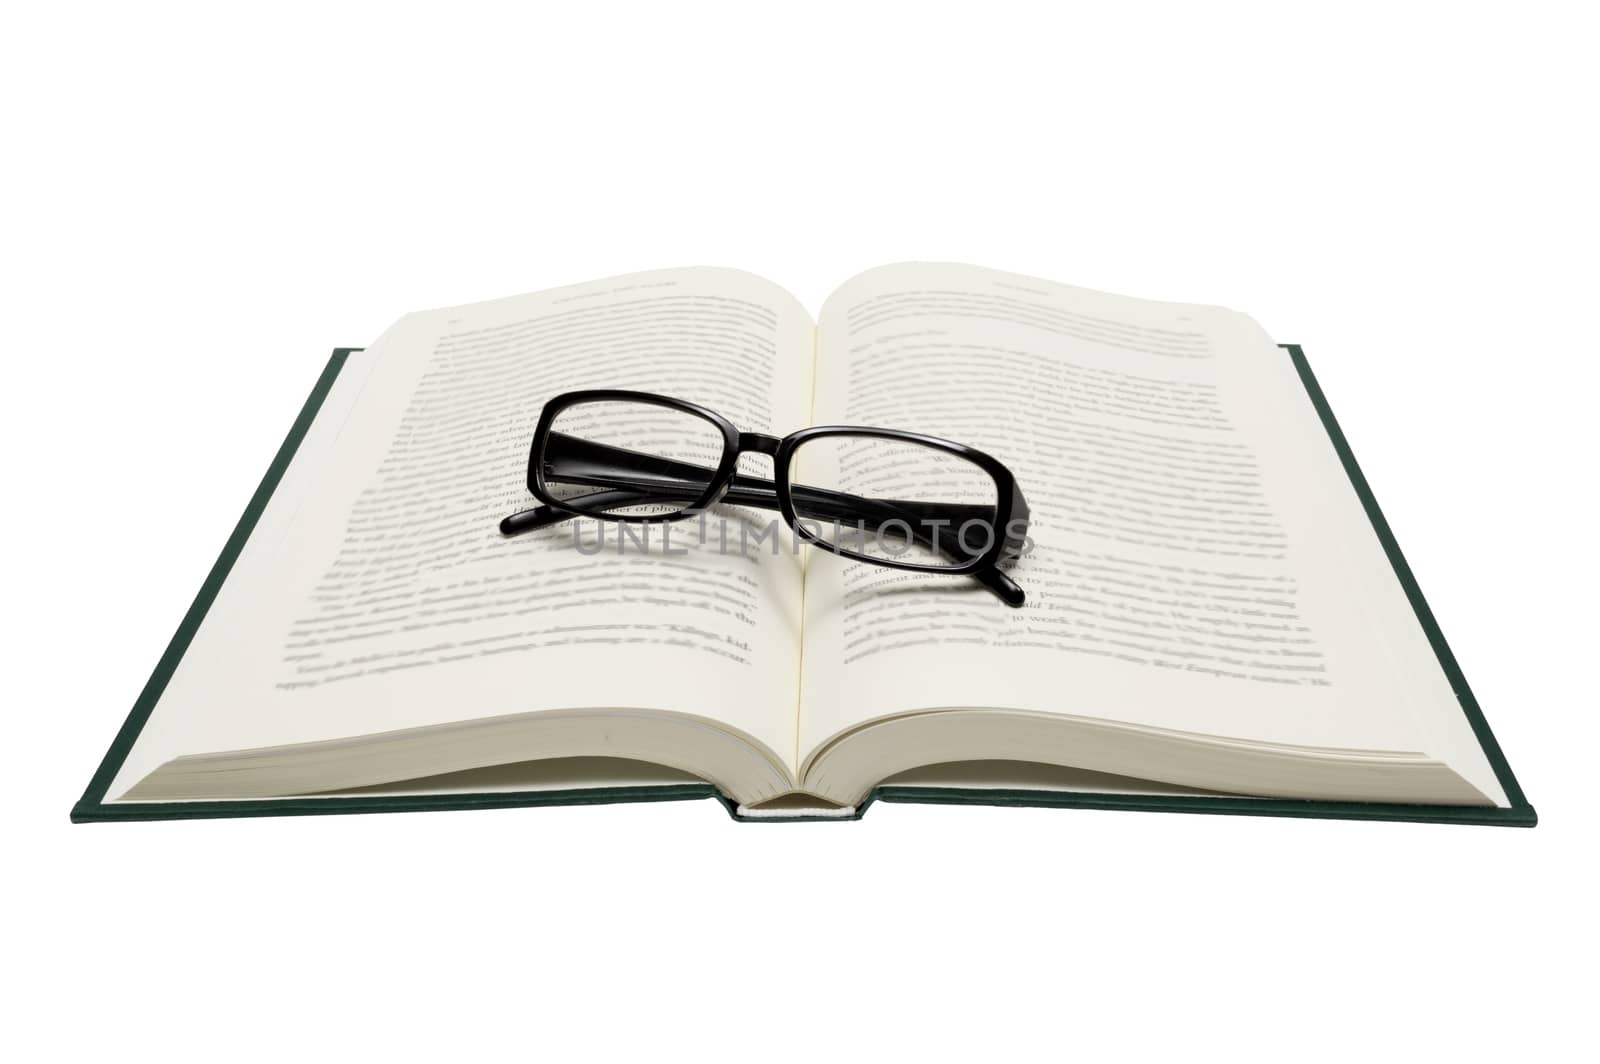 Horizontal shot of folded glasses on an opened book.  Isolated on white.